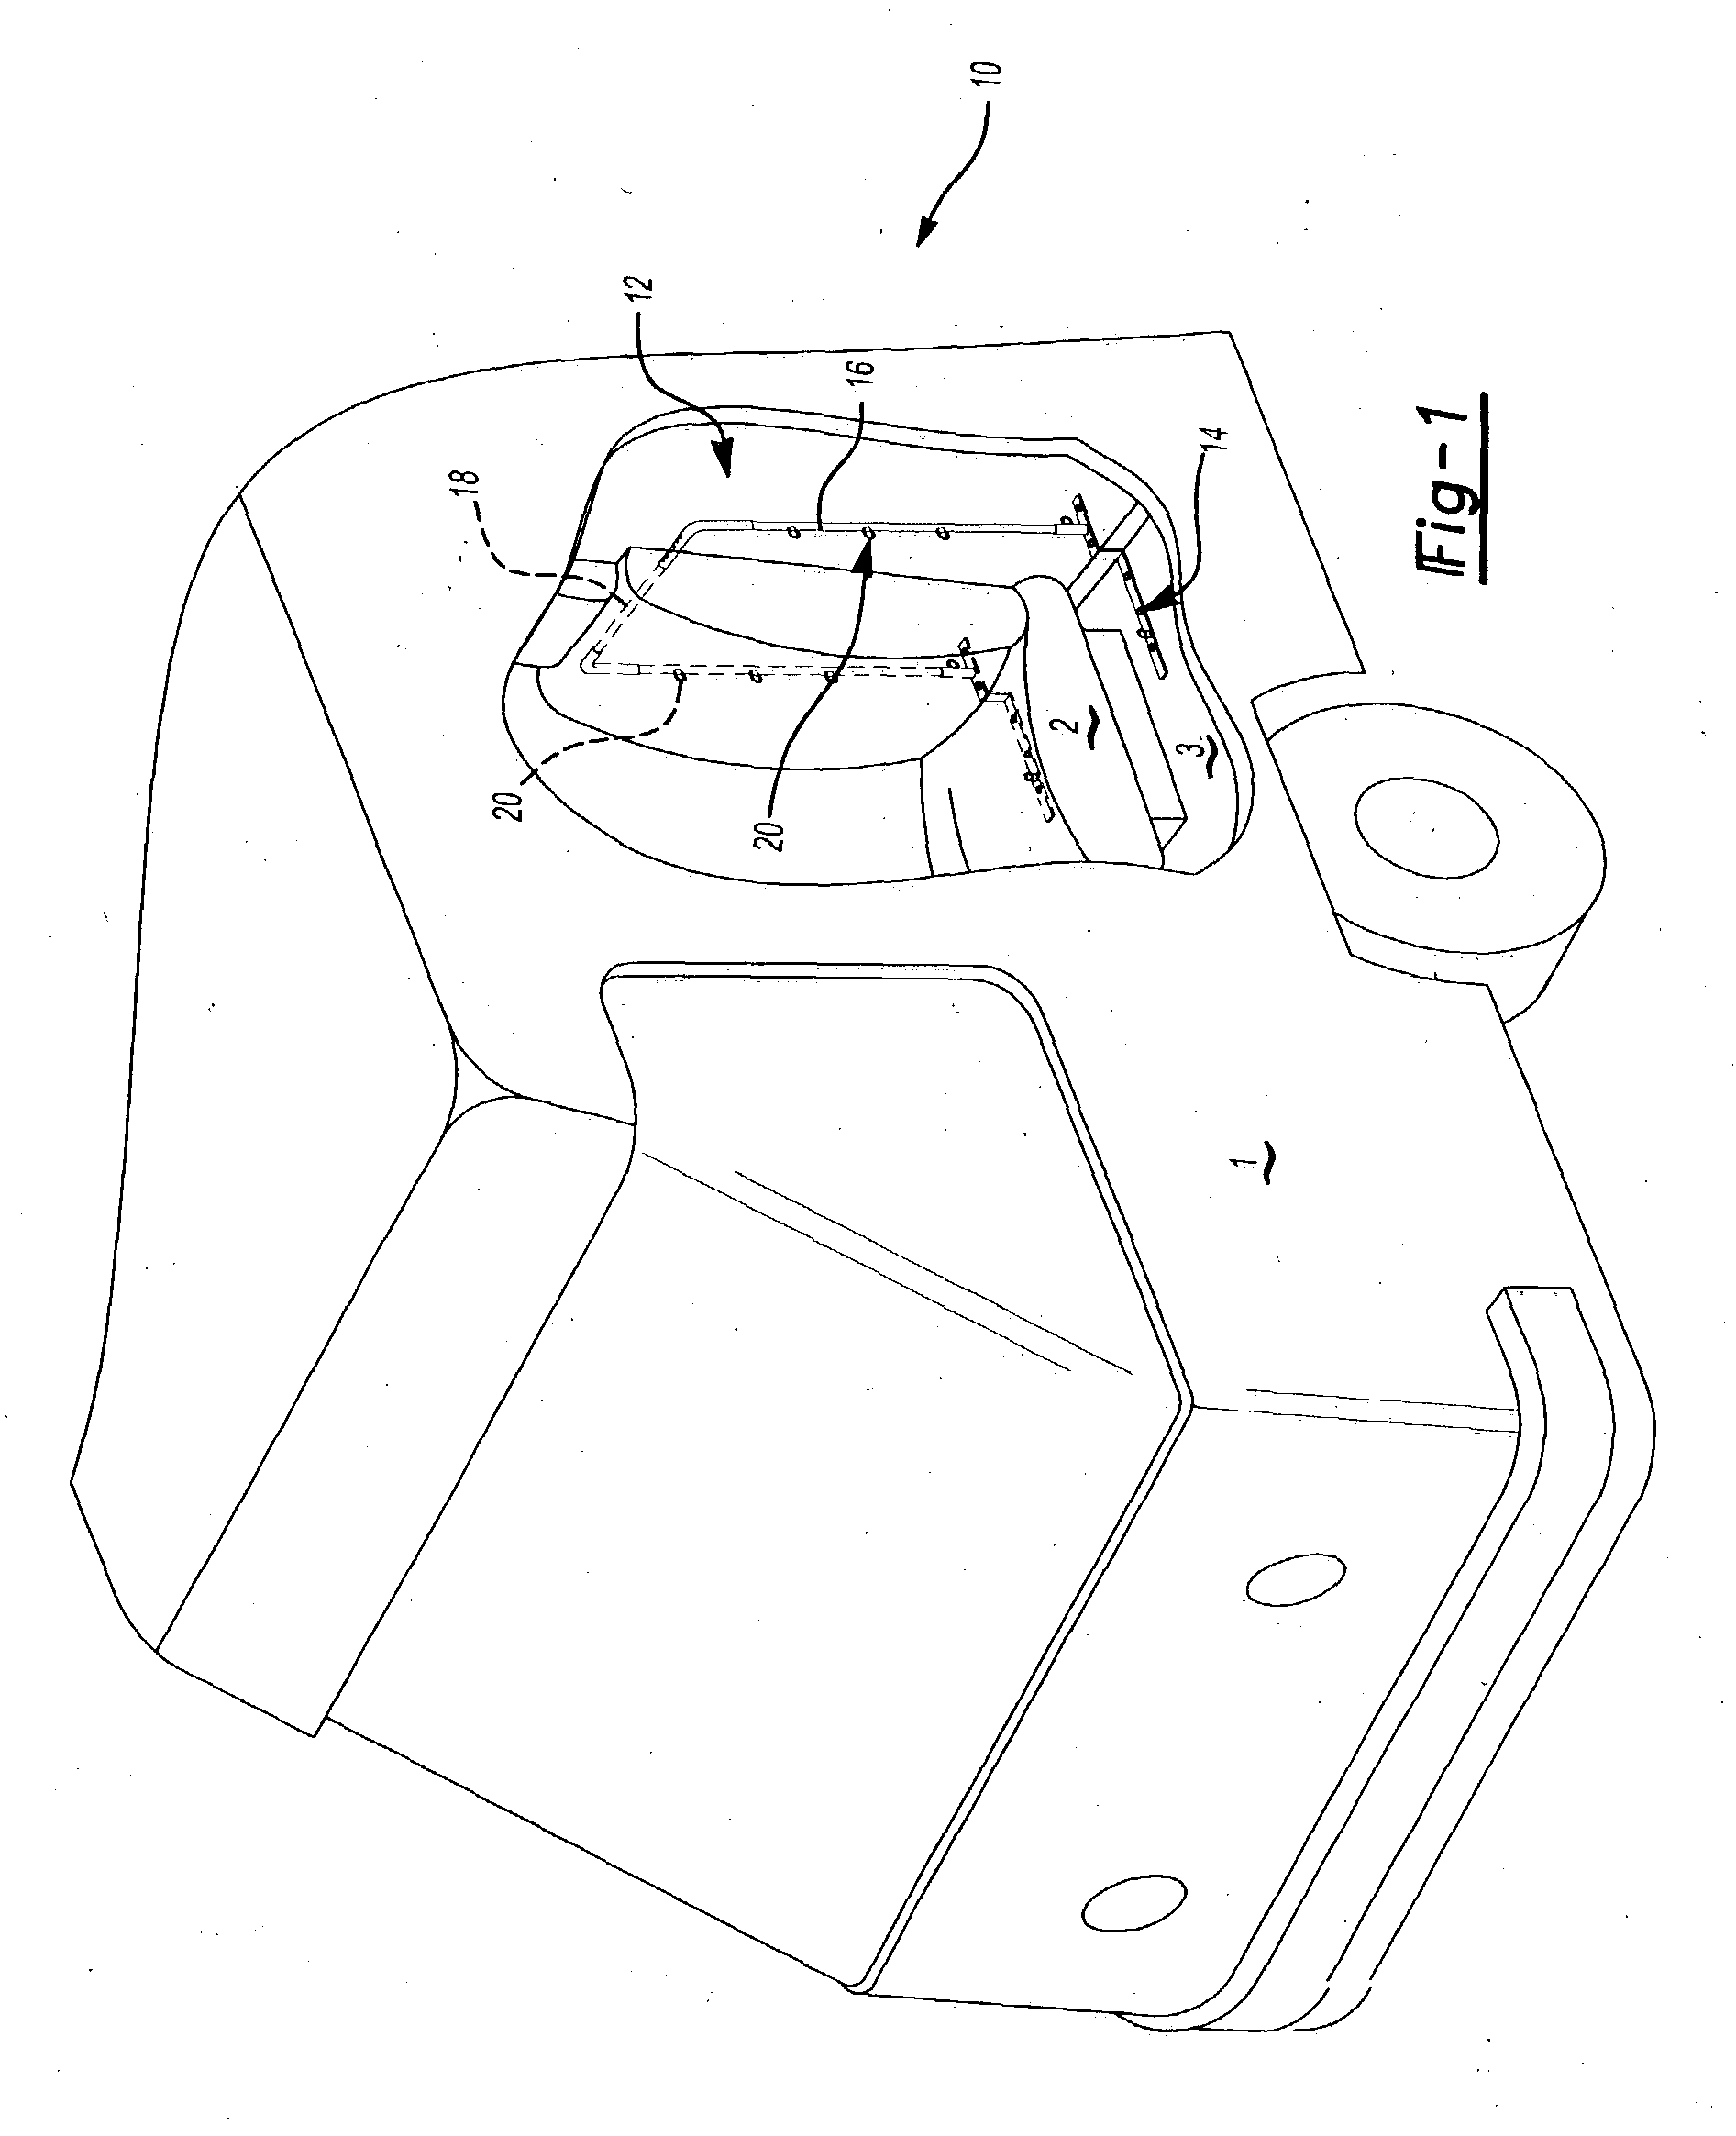 Exercise system for use within a vehicle